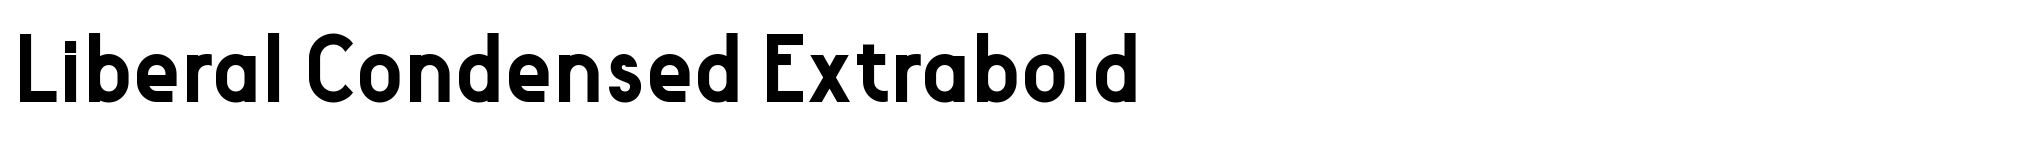 Liberal Condensed Extrabold image